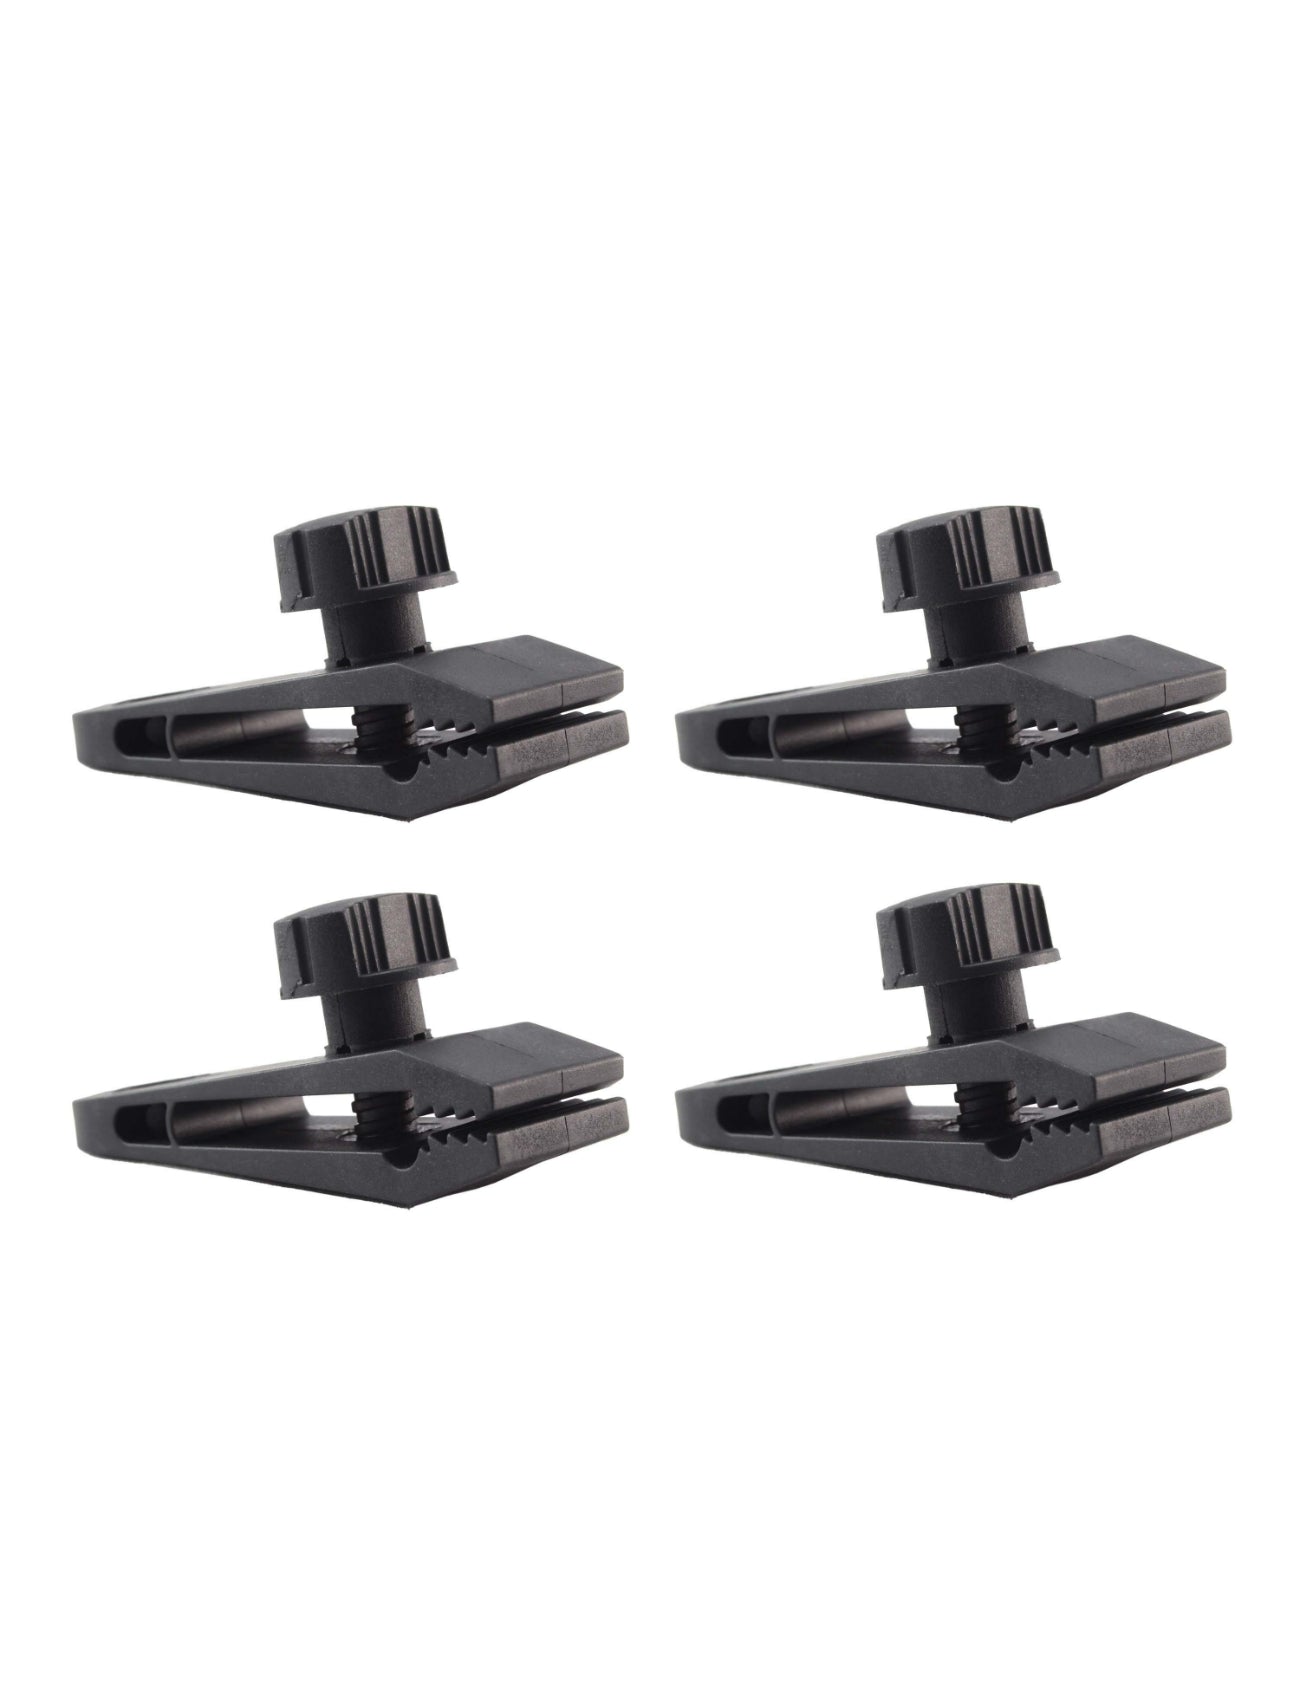 CAMPING CLAMPS 4pc BLACK